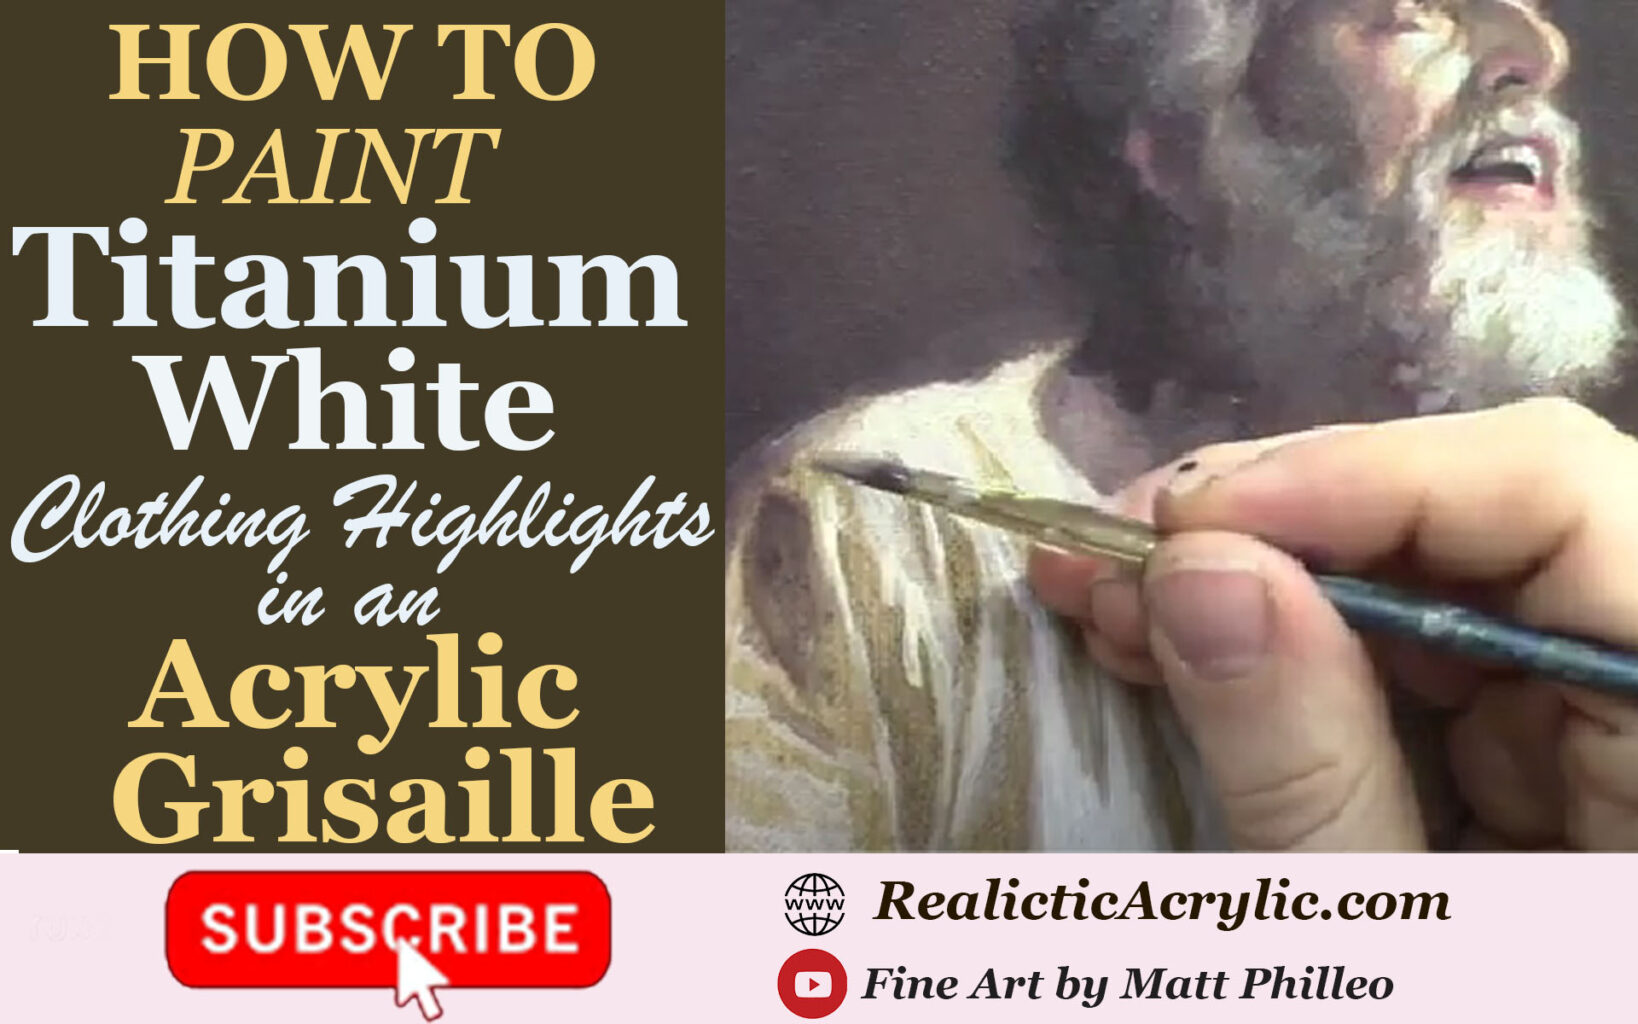 How to Paint Titanium White Clothing Highlights in an Acrylic Grisaille